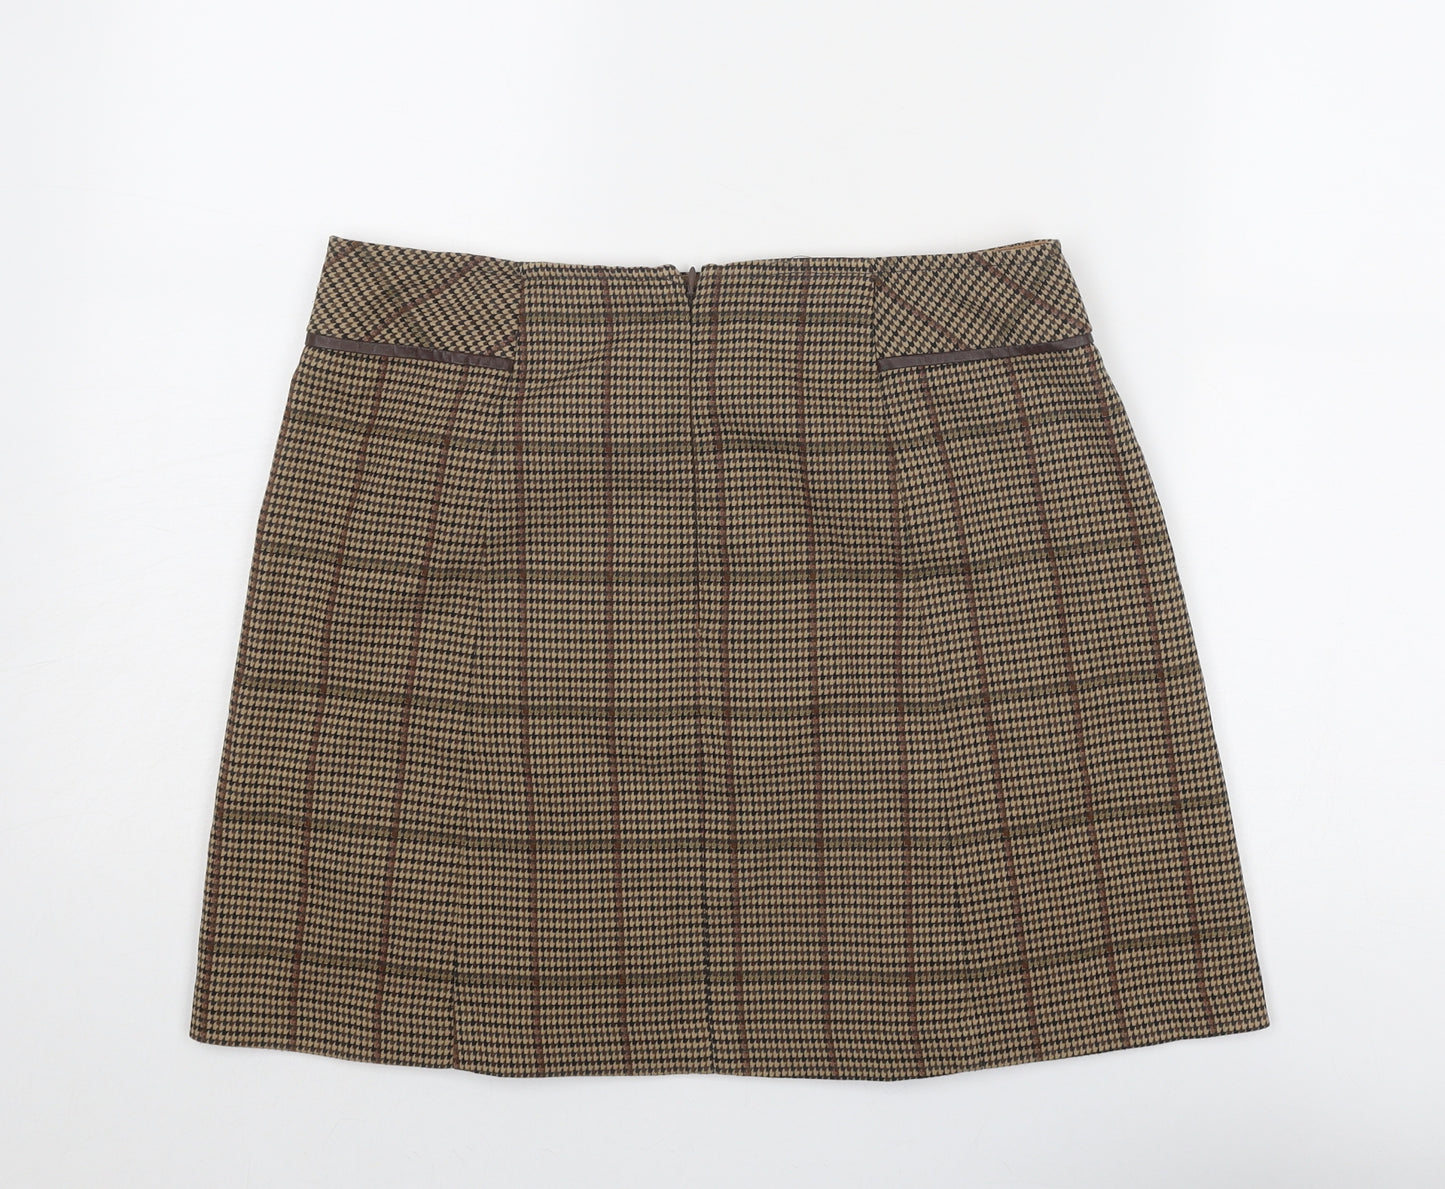 NEXT Womens Brown Plaid Polyester A-Line Skirt Size 12 Zip